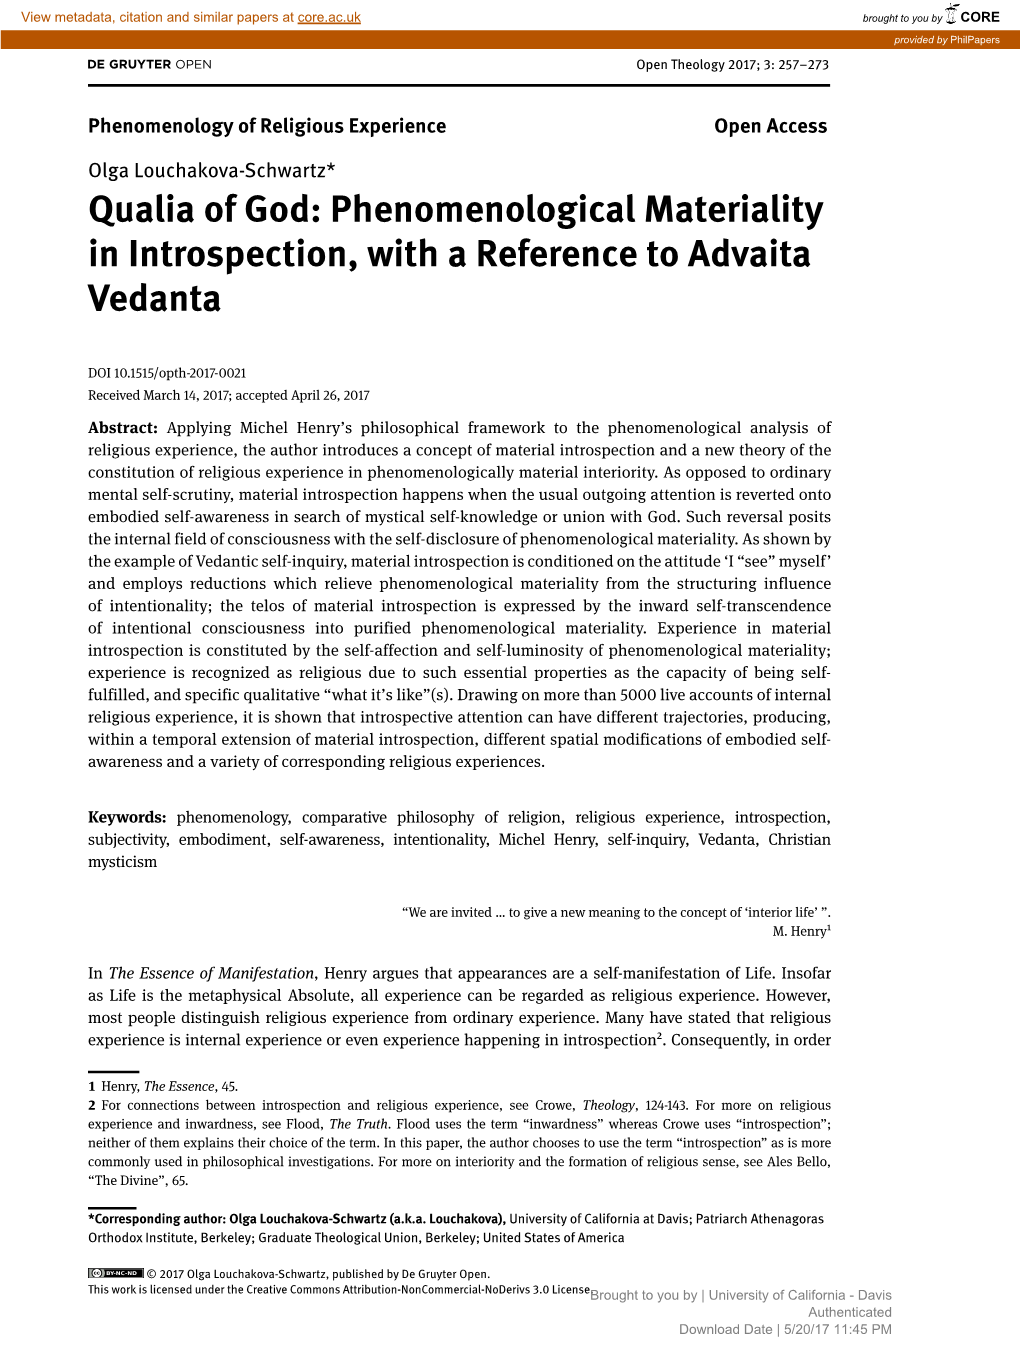 Qualia of God: Phenomenological Materiality in Introspection, with a Reference to Advaita Vedanta